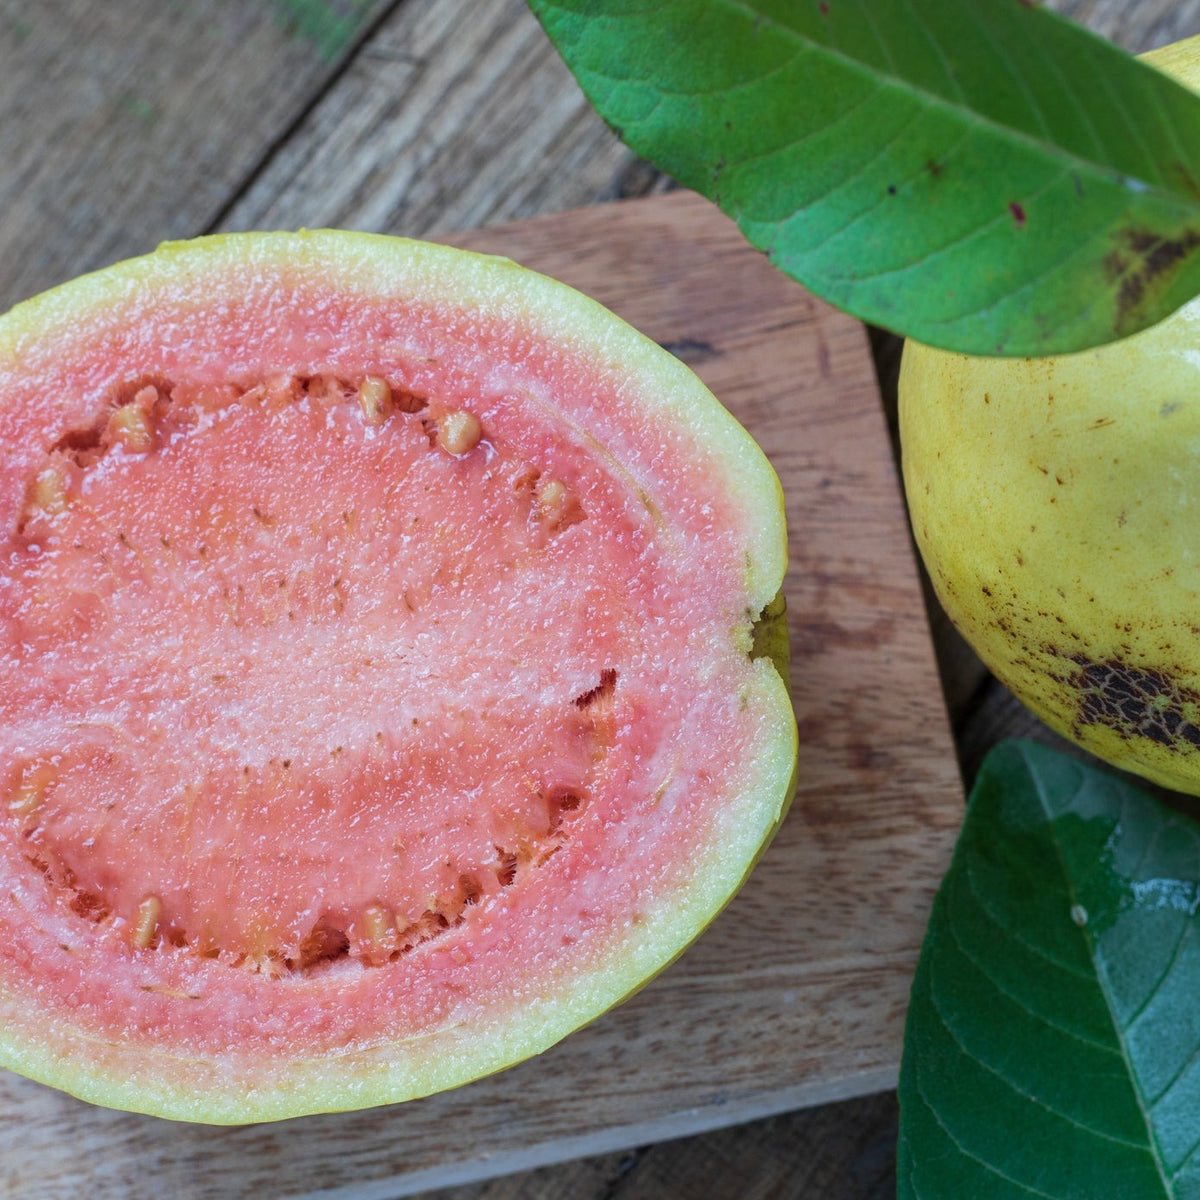 Taiwan Pink Guava - Large and Delicious fruit